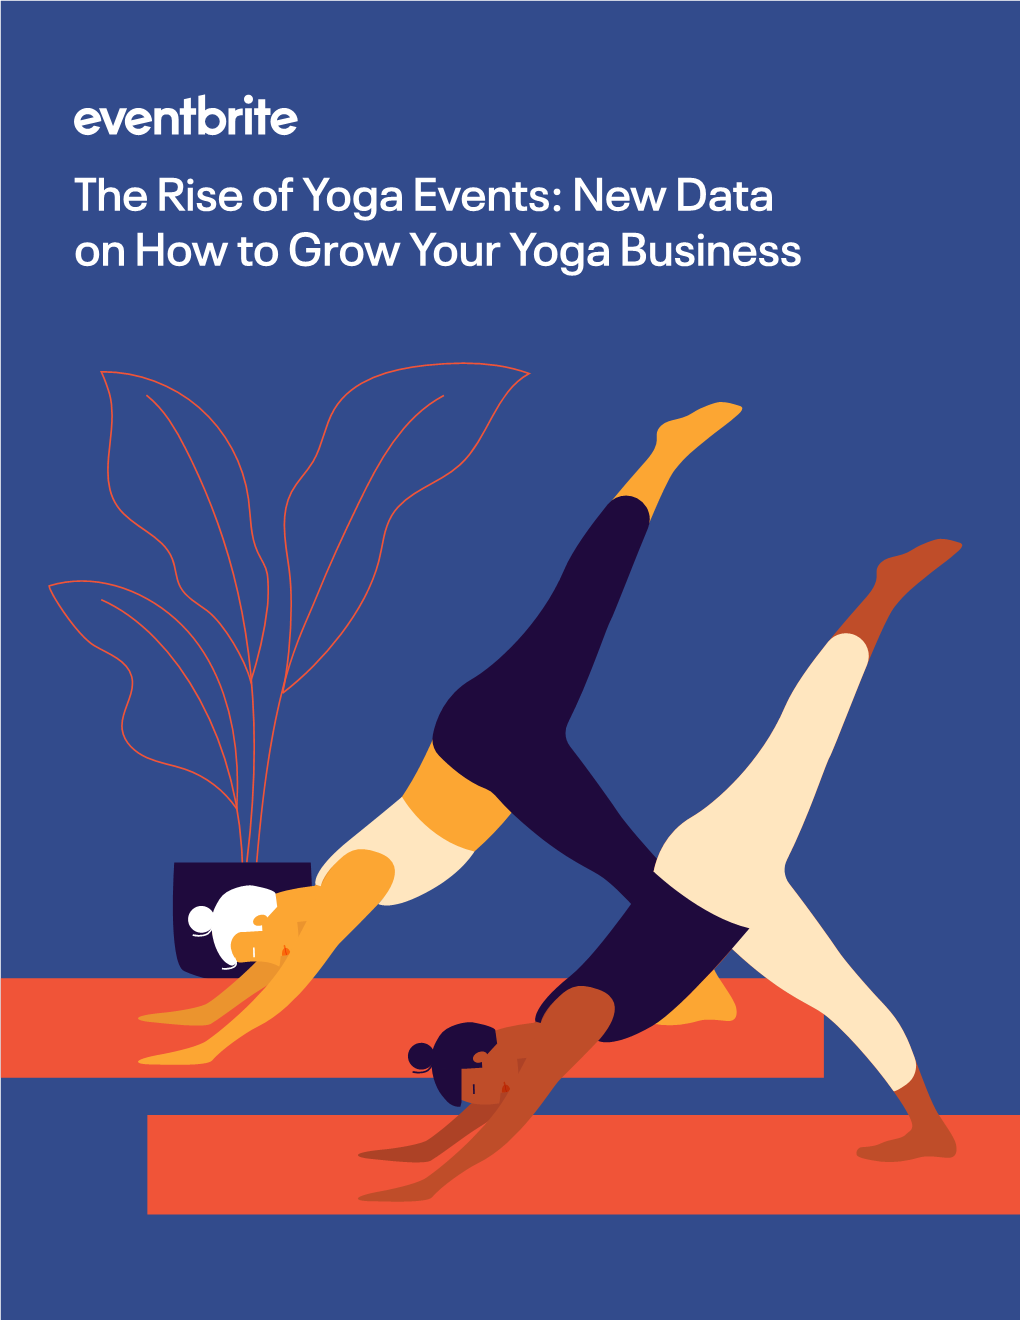 The Rise of Yoga Events: New Data on How to Grow Your Yoga Business